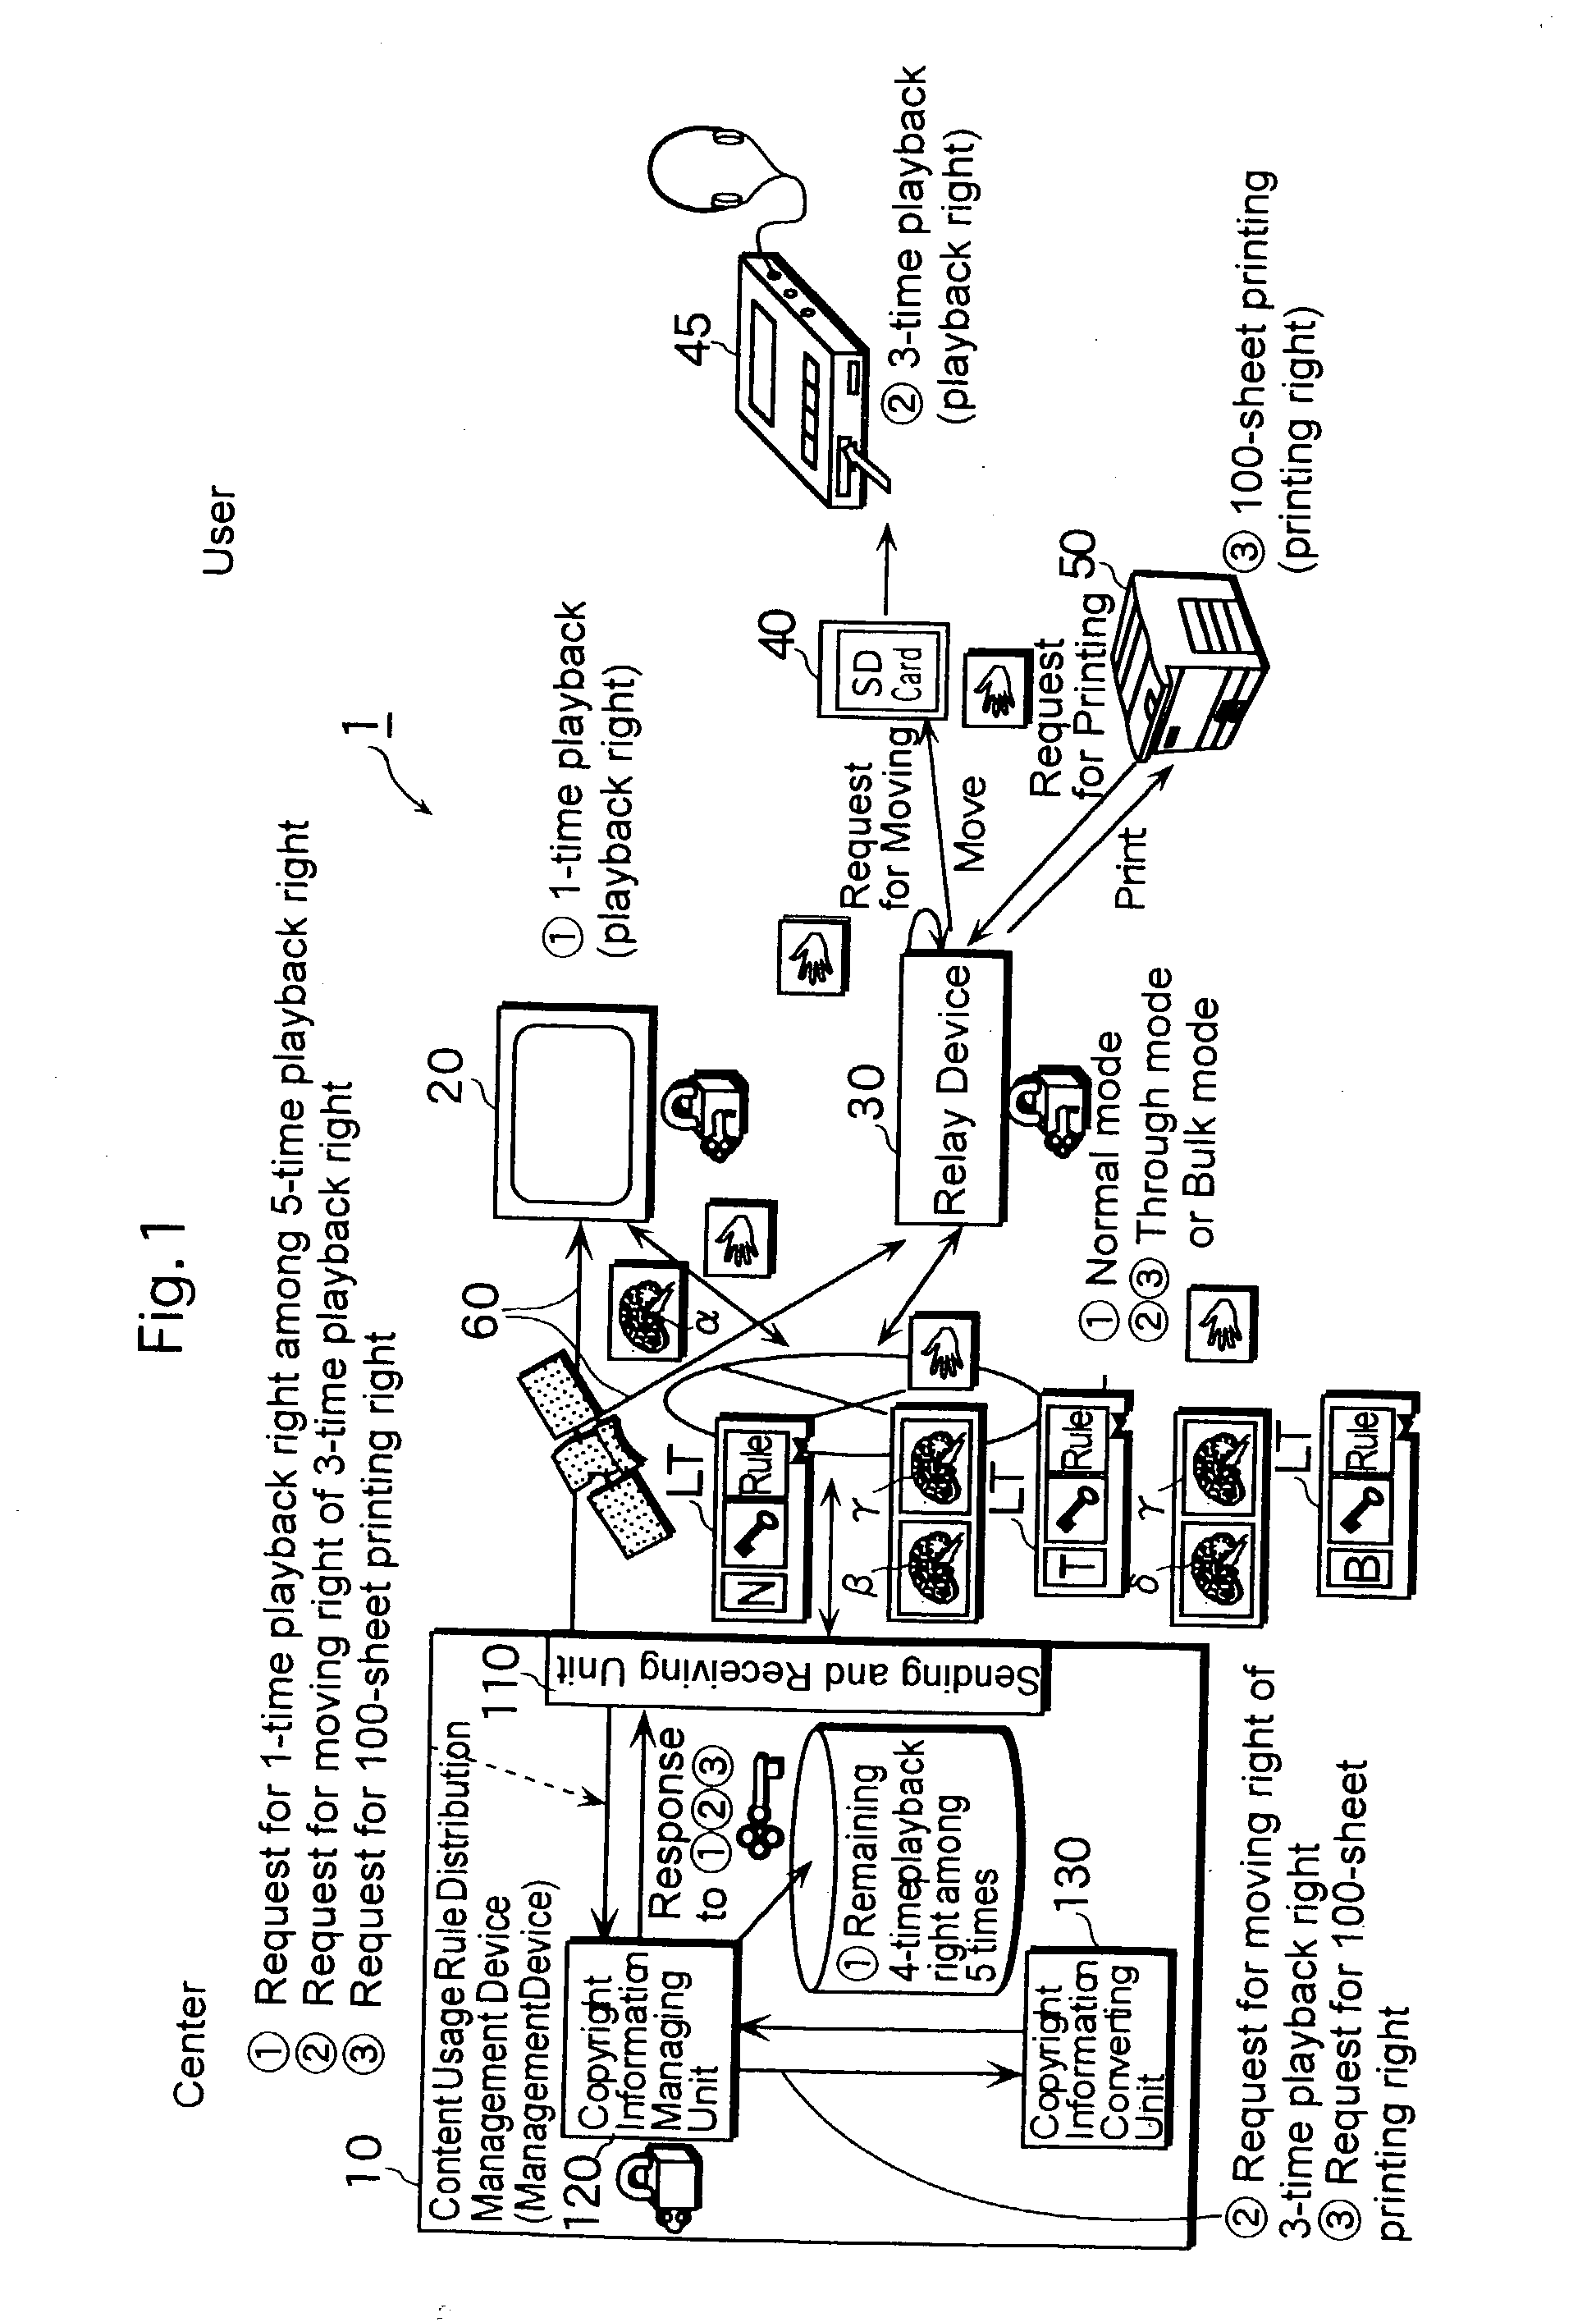 License management system, license management device, relay device and terminal device